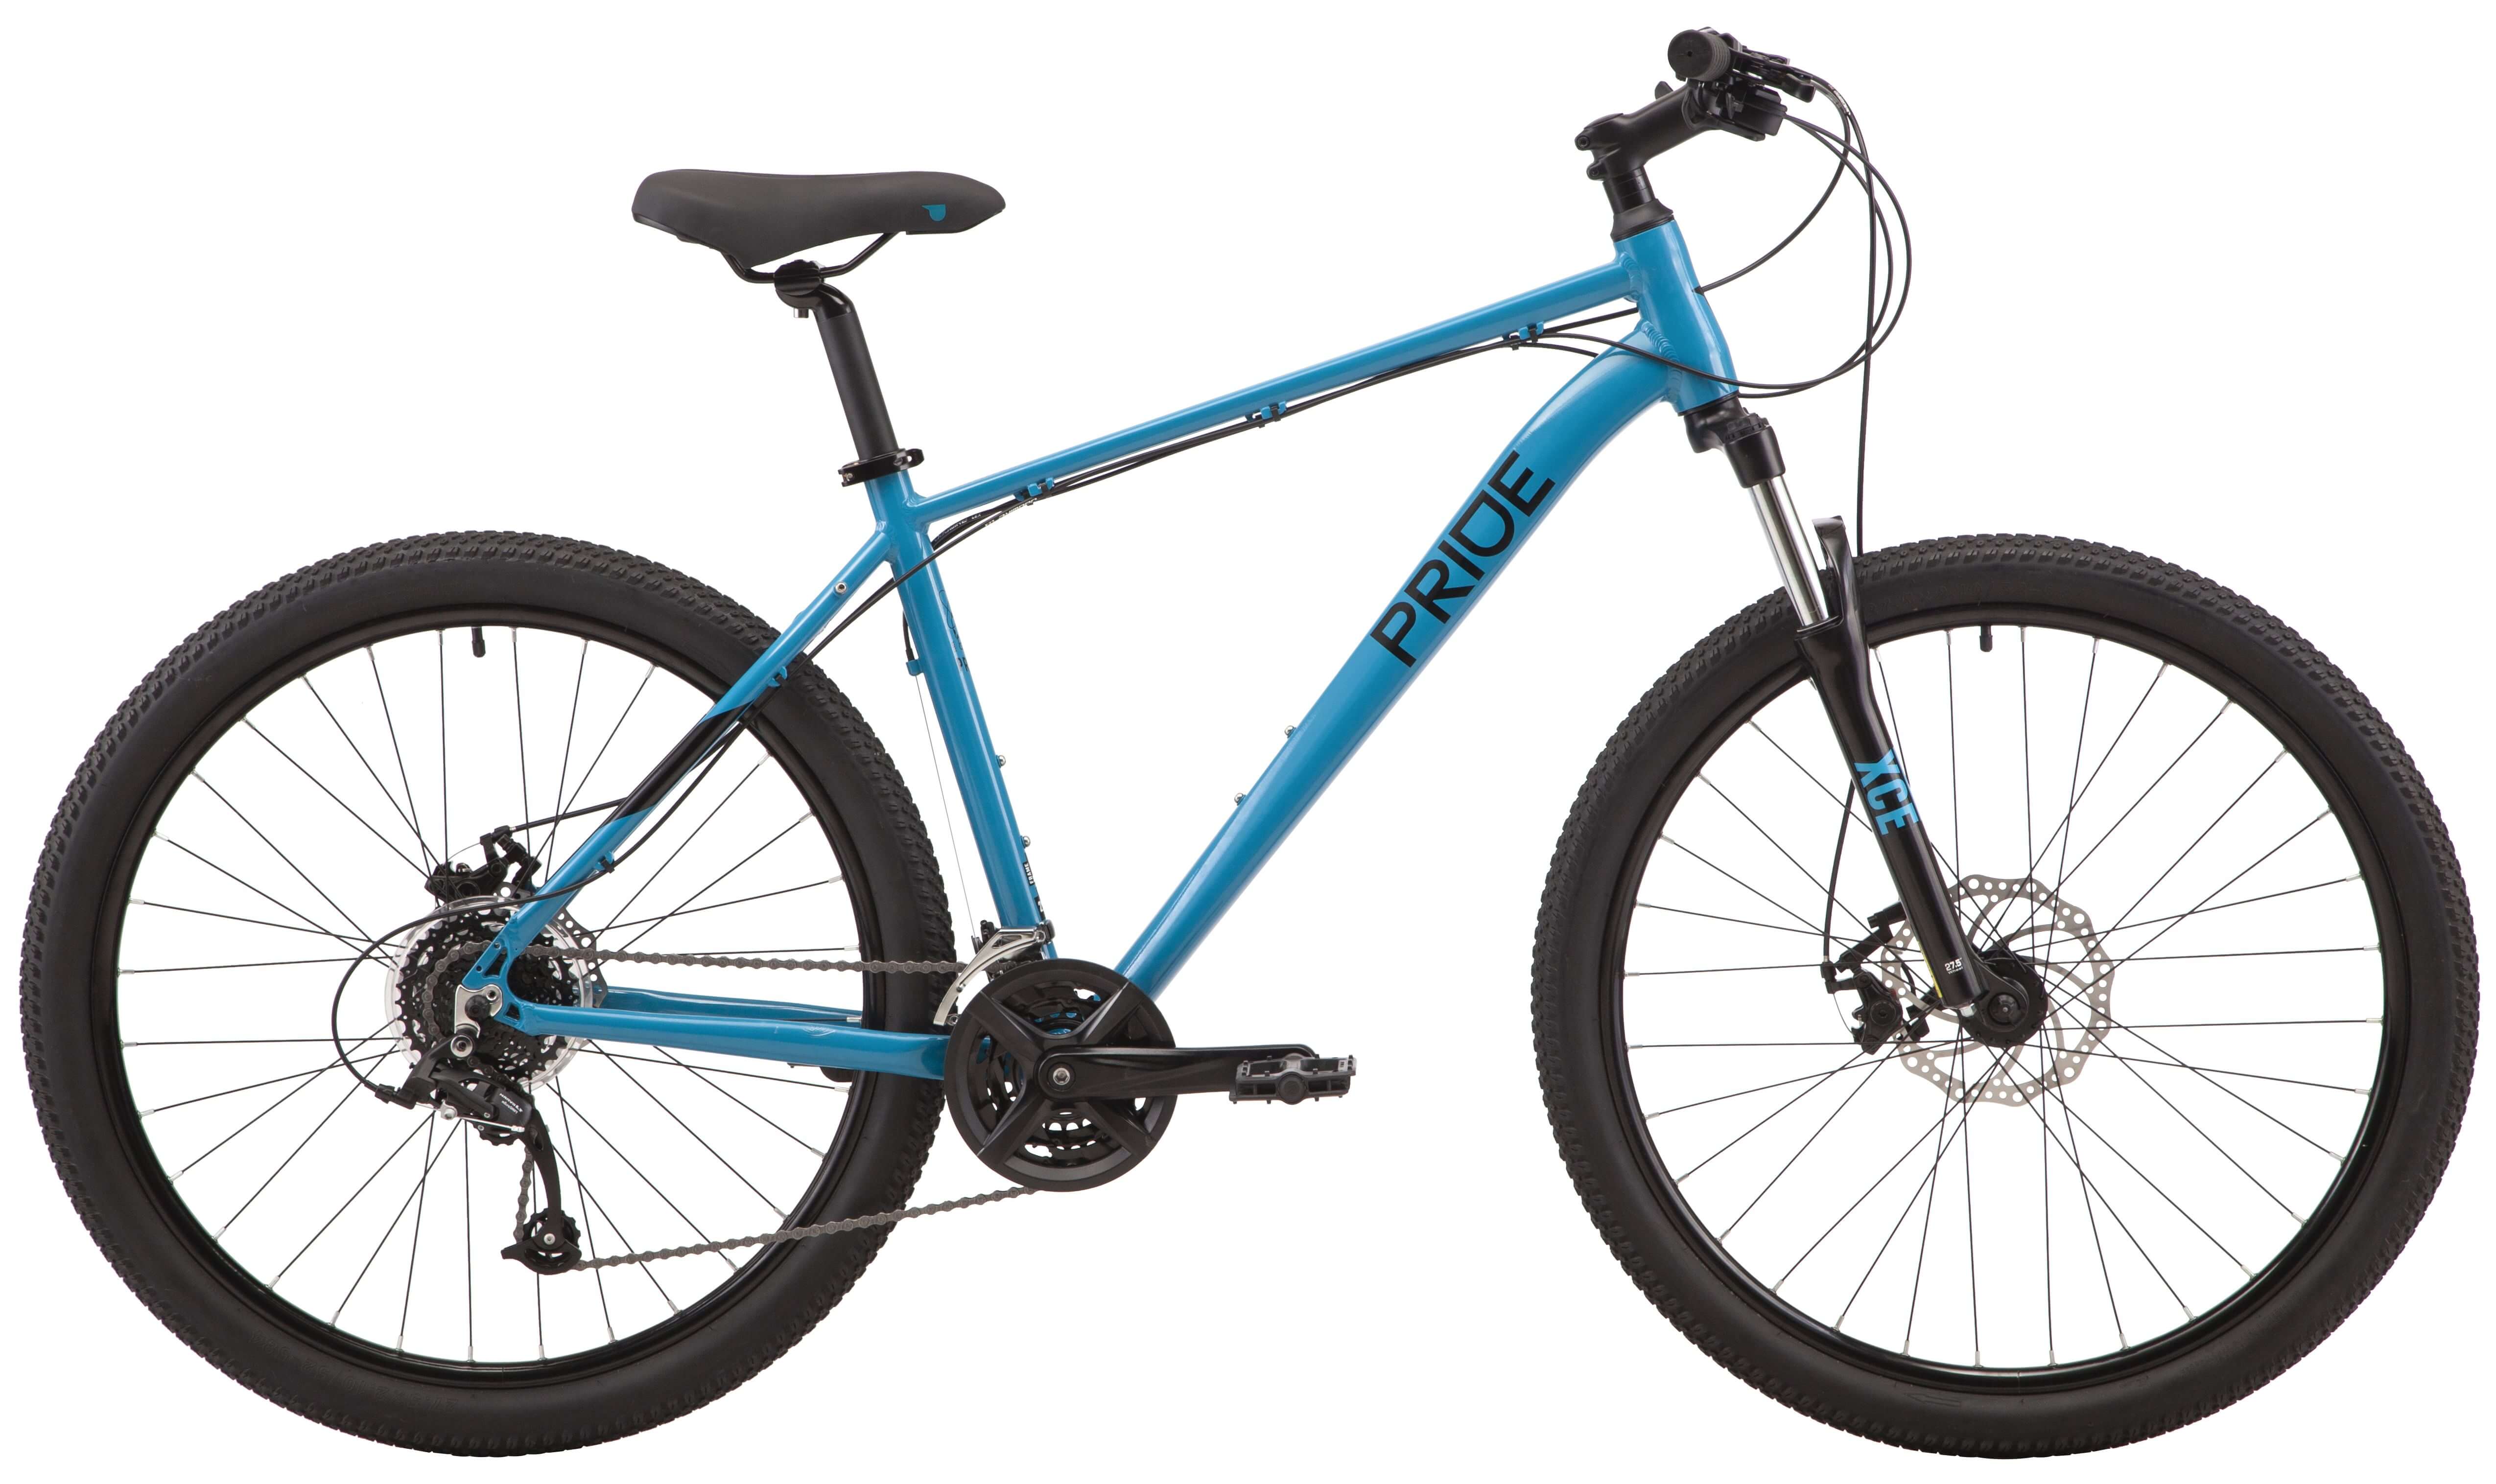 27.5" PRIDE MARVEL 7.2 frame - S 2022 turquoise (rear and front switches and tamnet - Microshift) Photo